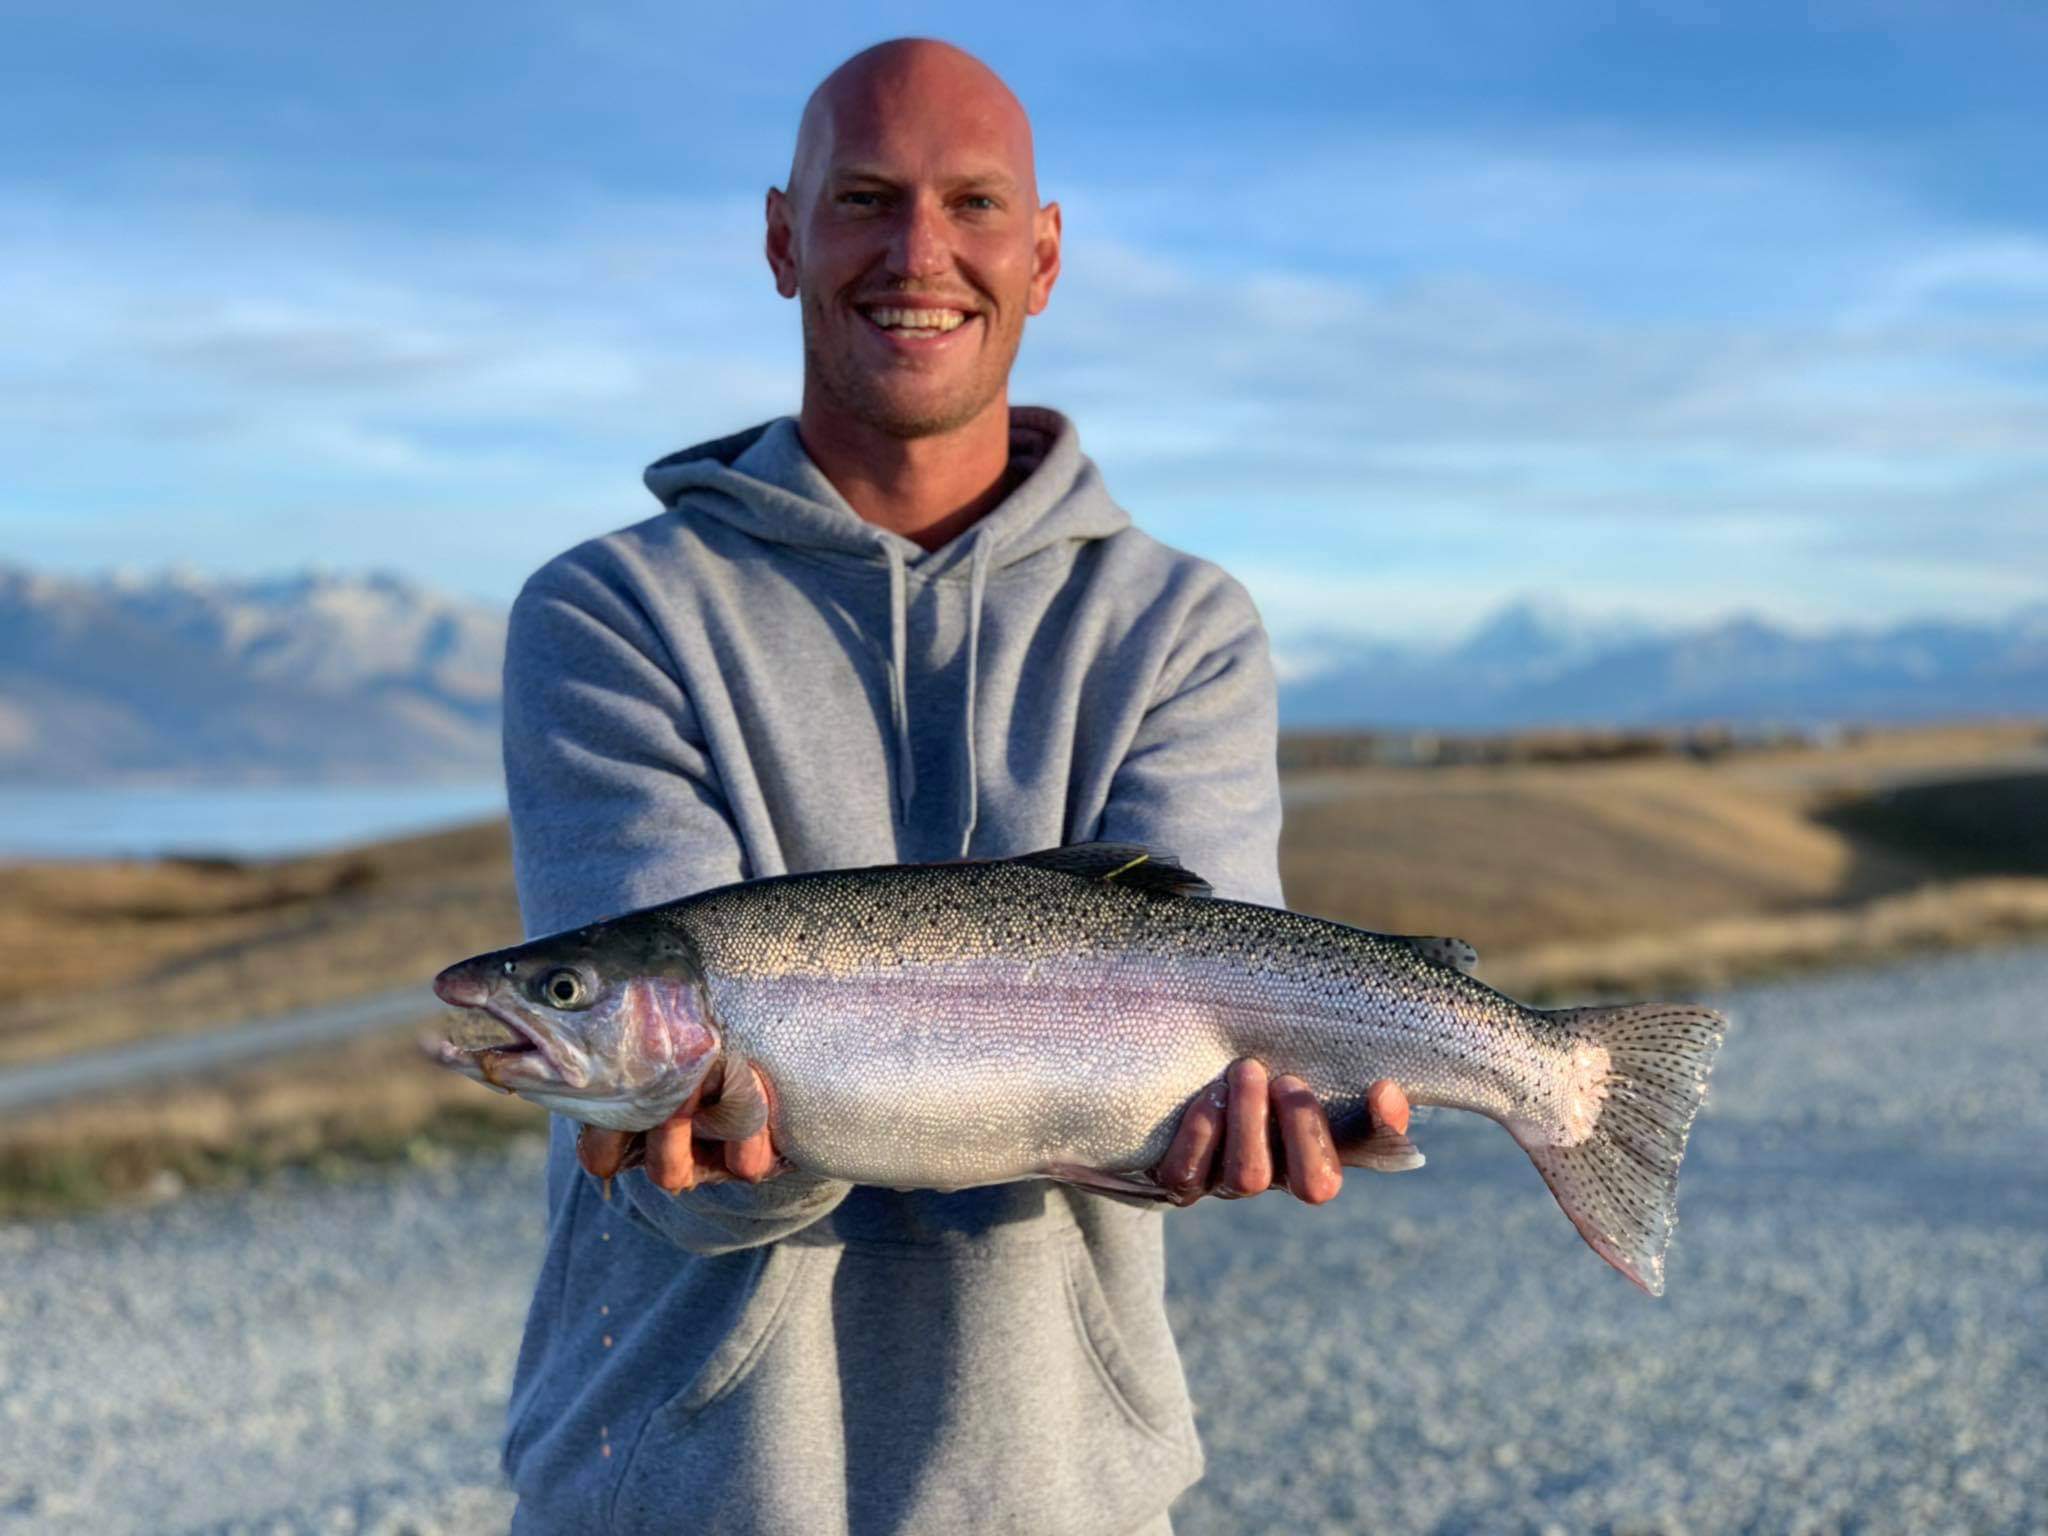 WFR2022.48 Elliot Gilchrist caught this tagged rainbow trout that doubled its weight in just 7 months in the Tekapo Canal